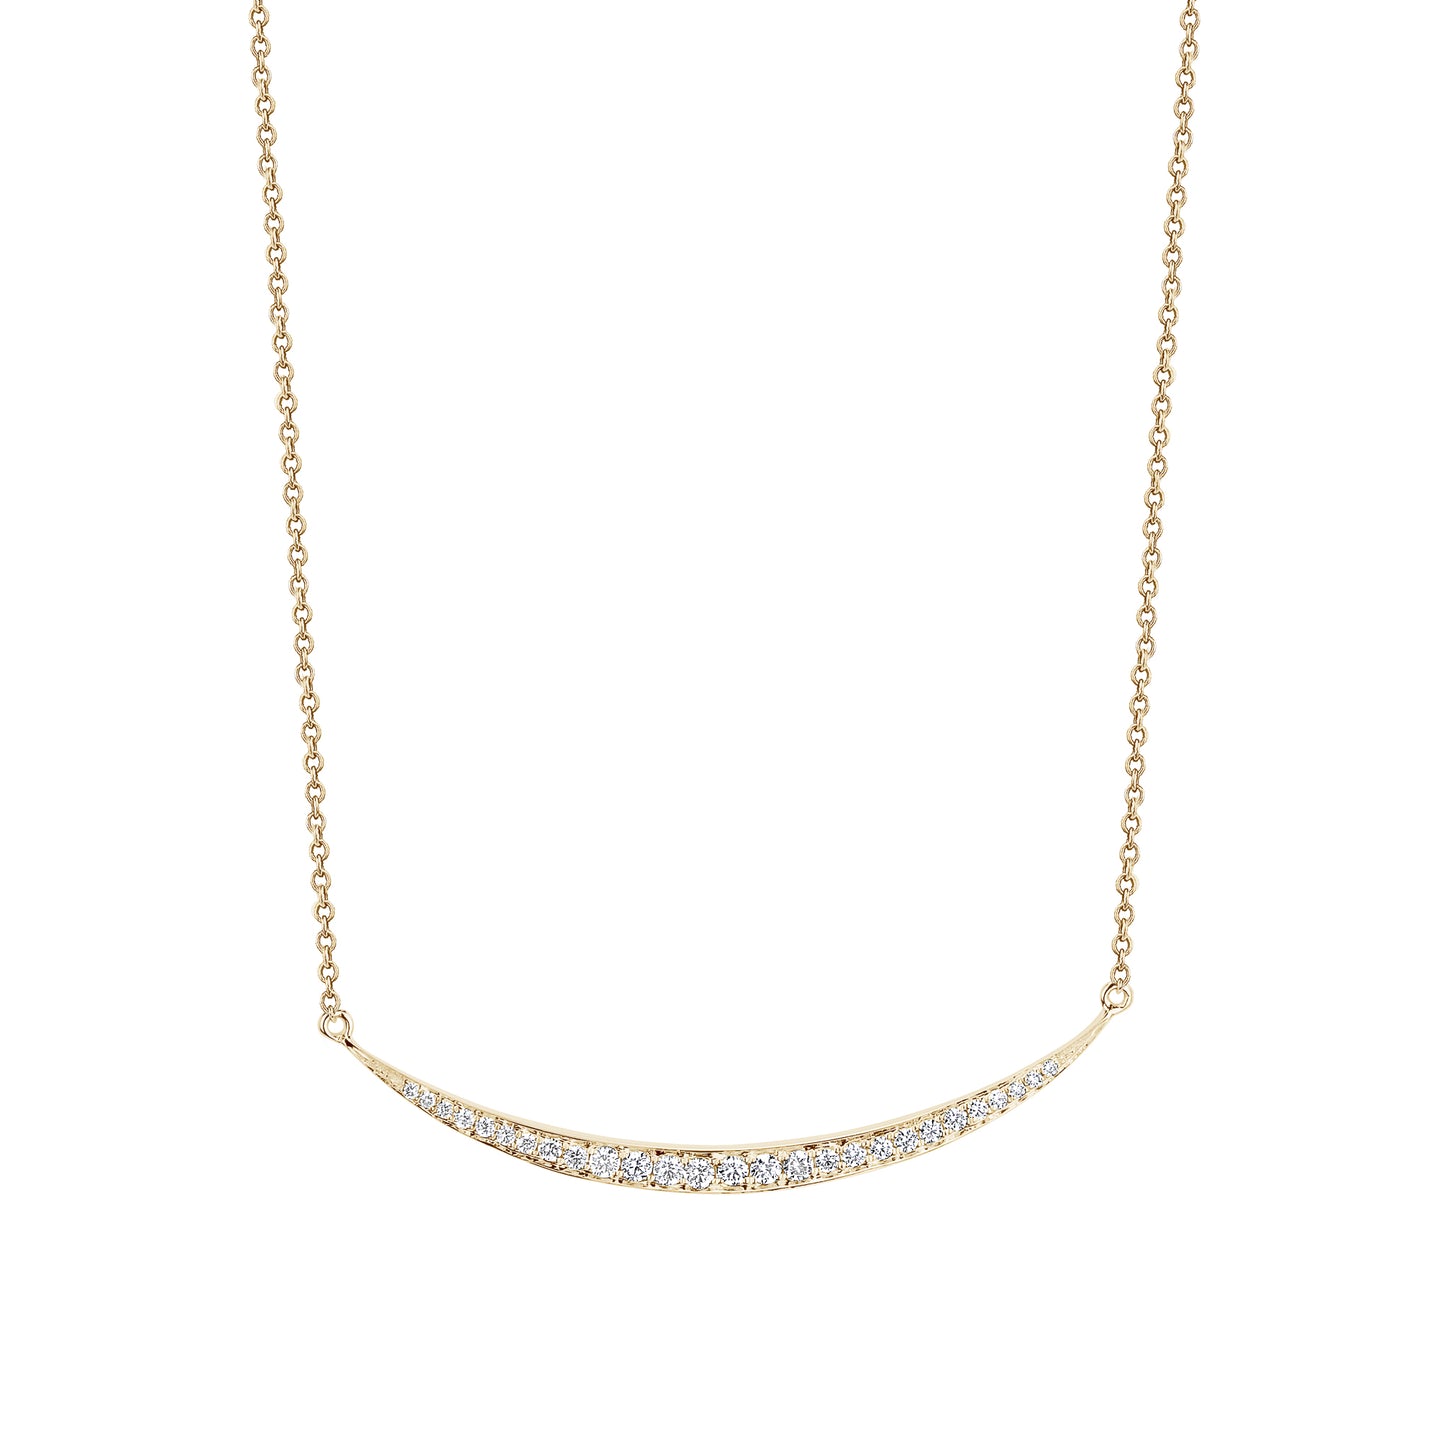 Curved Diamond Bar on Chain Necklace